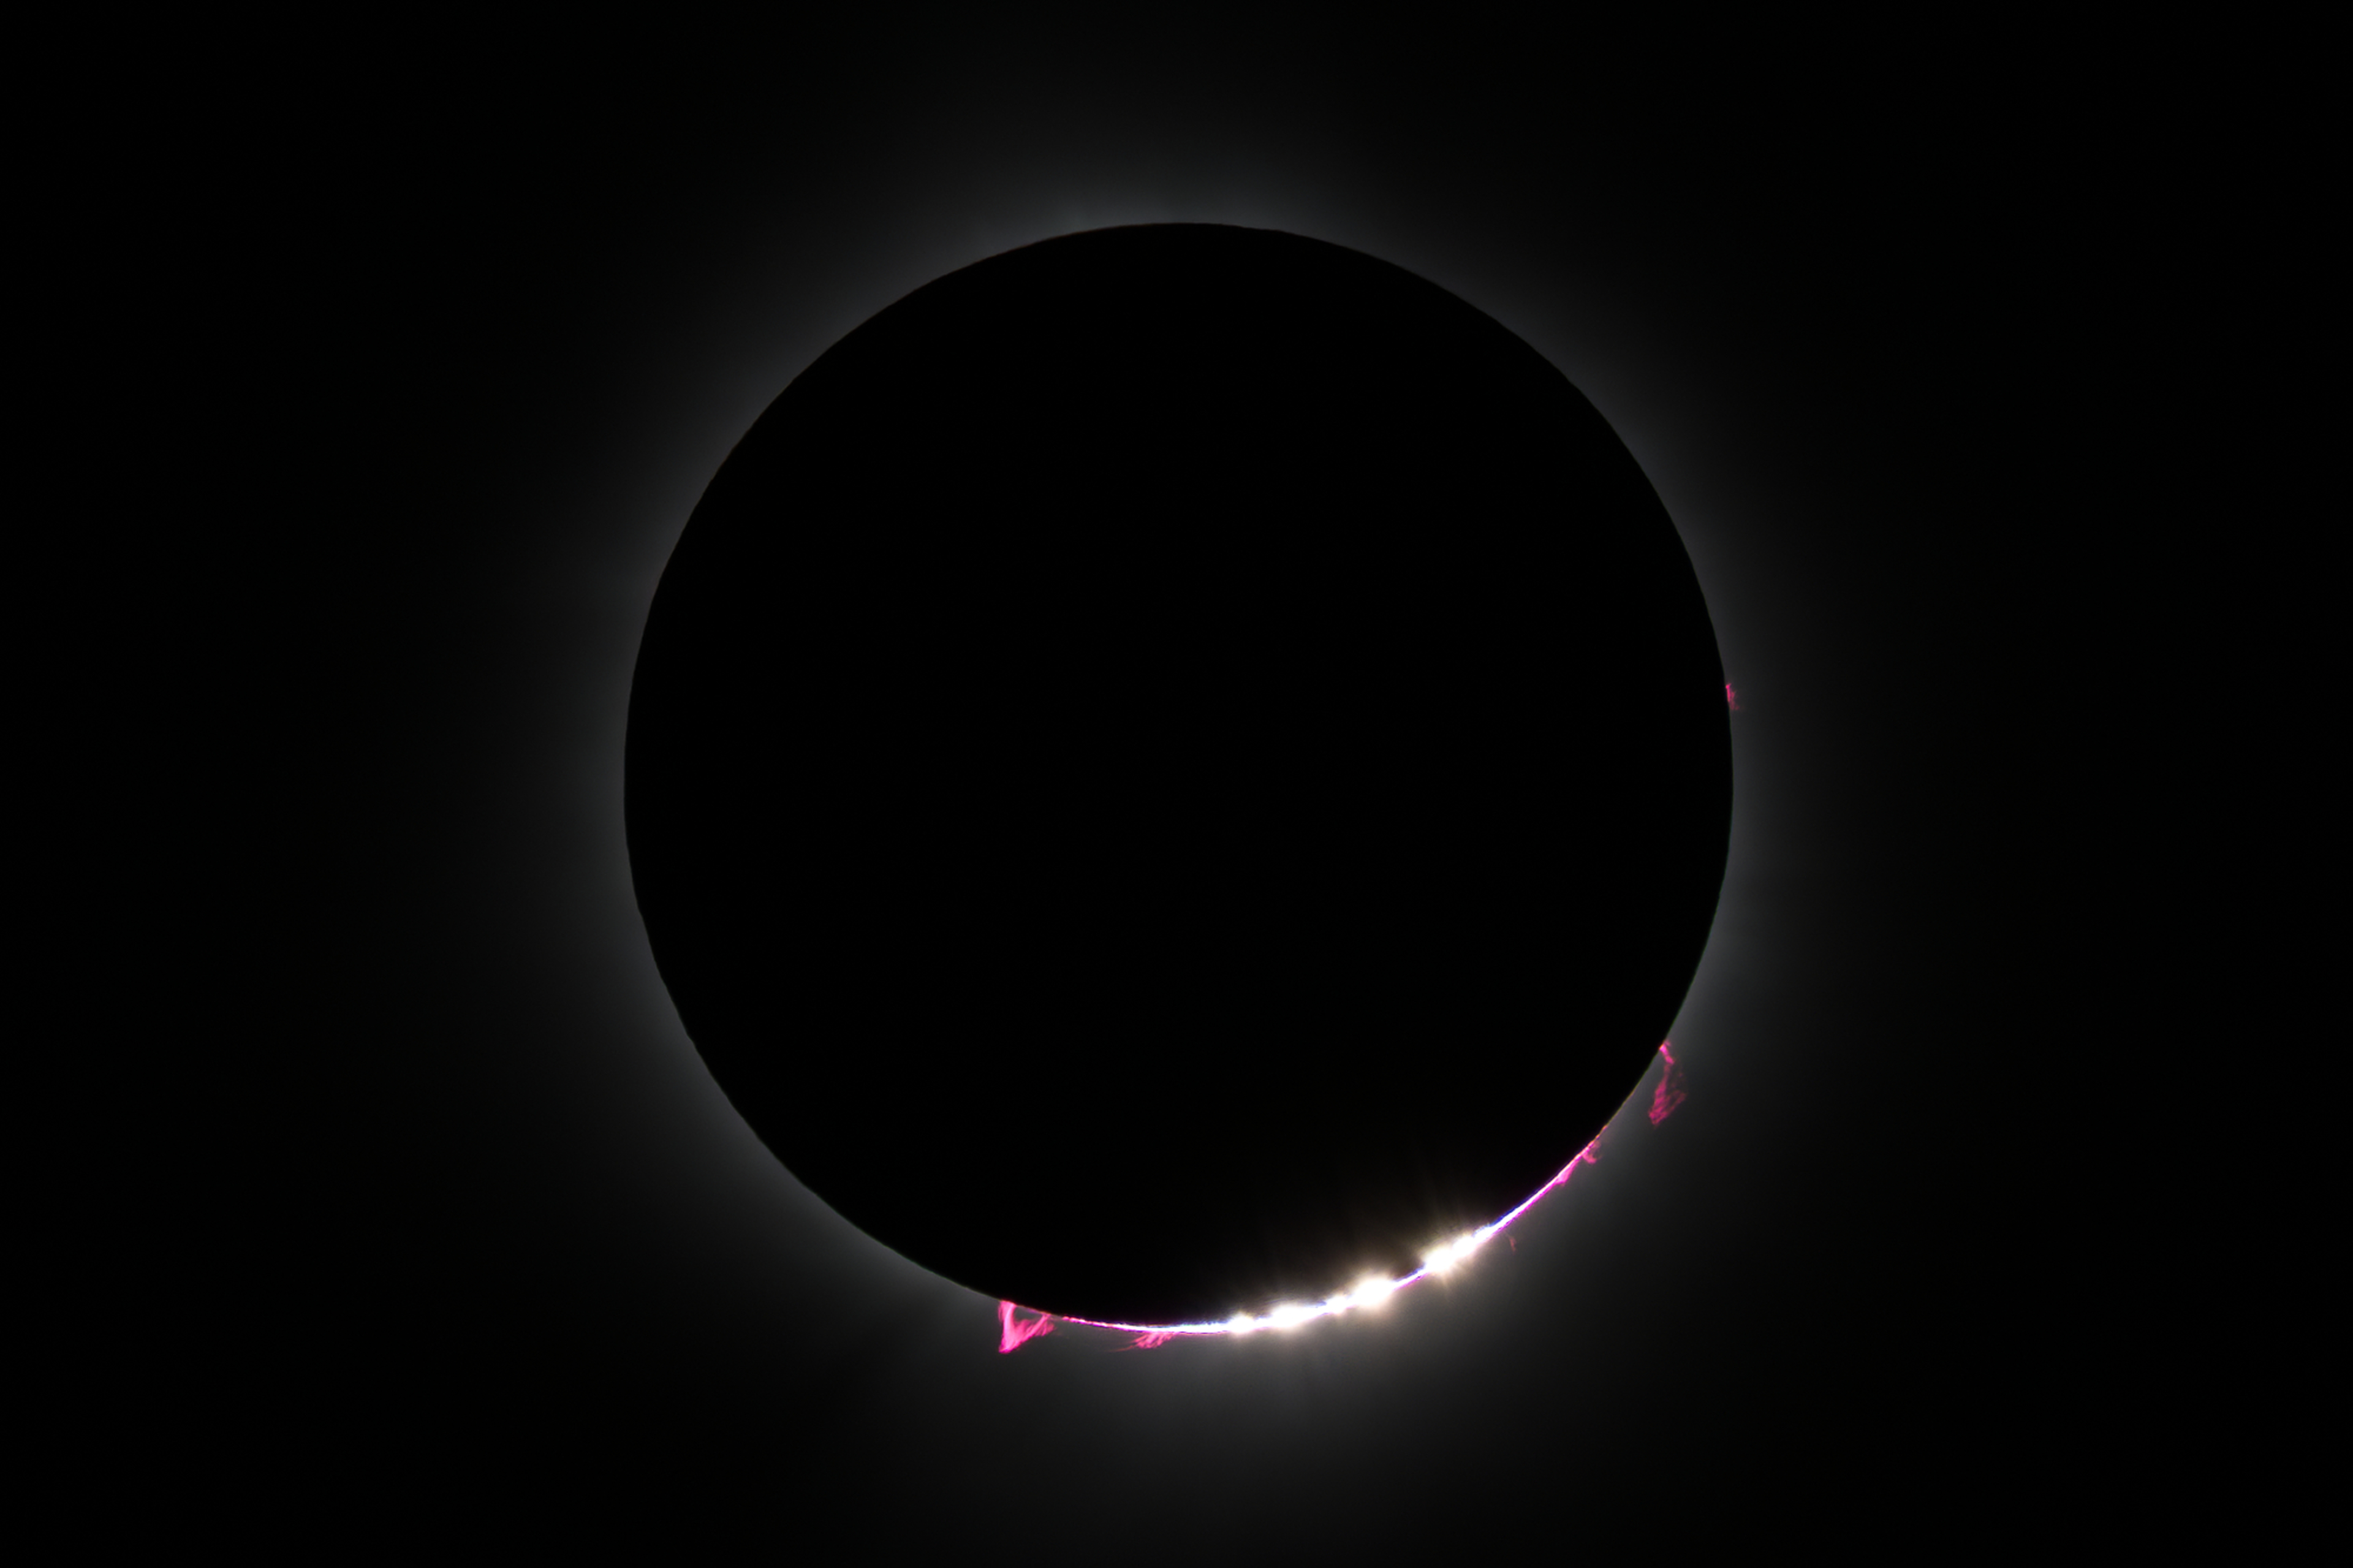 Baily’s Beads and Prominences